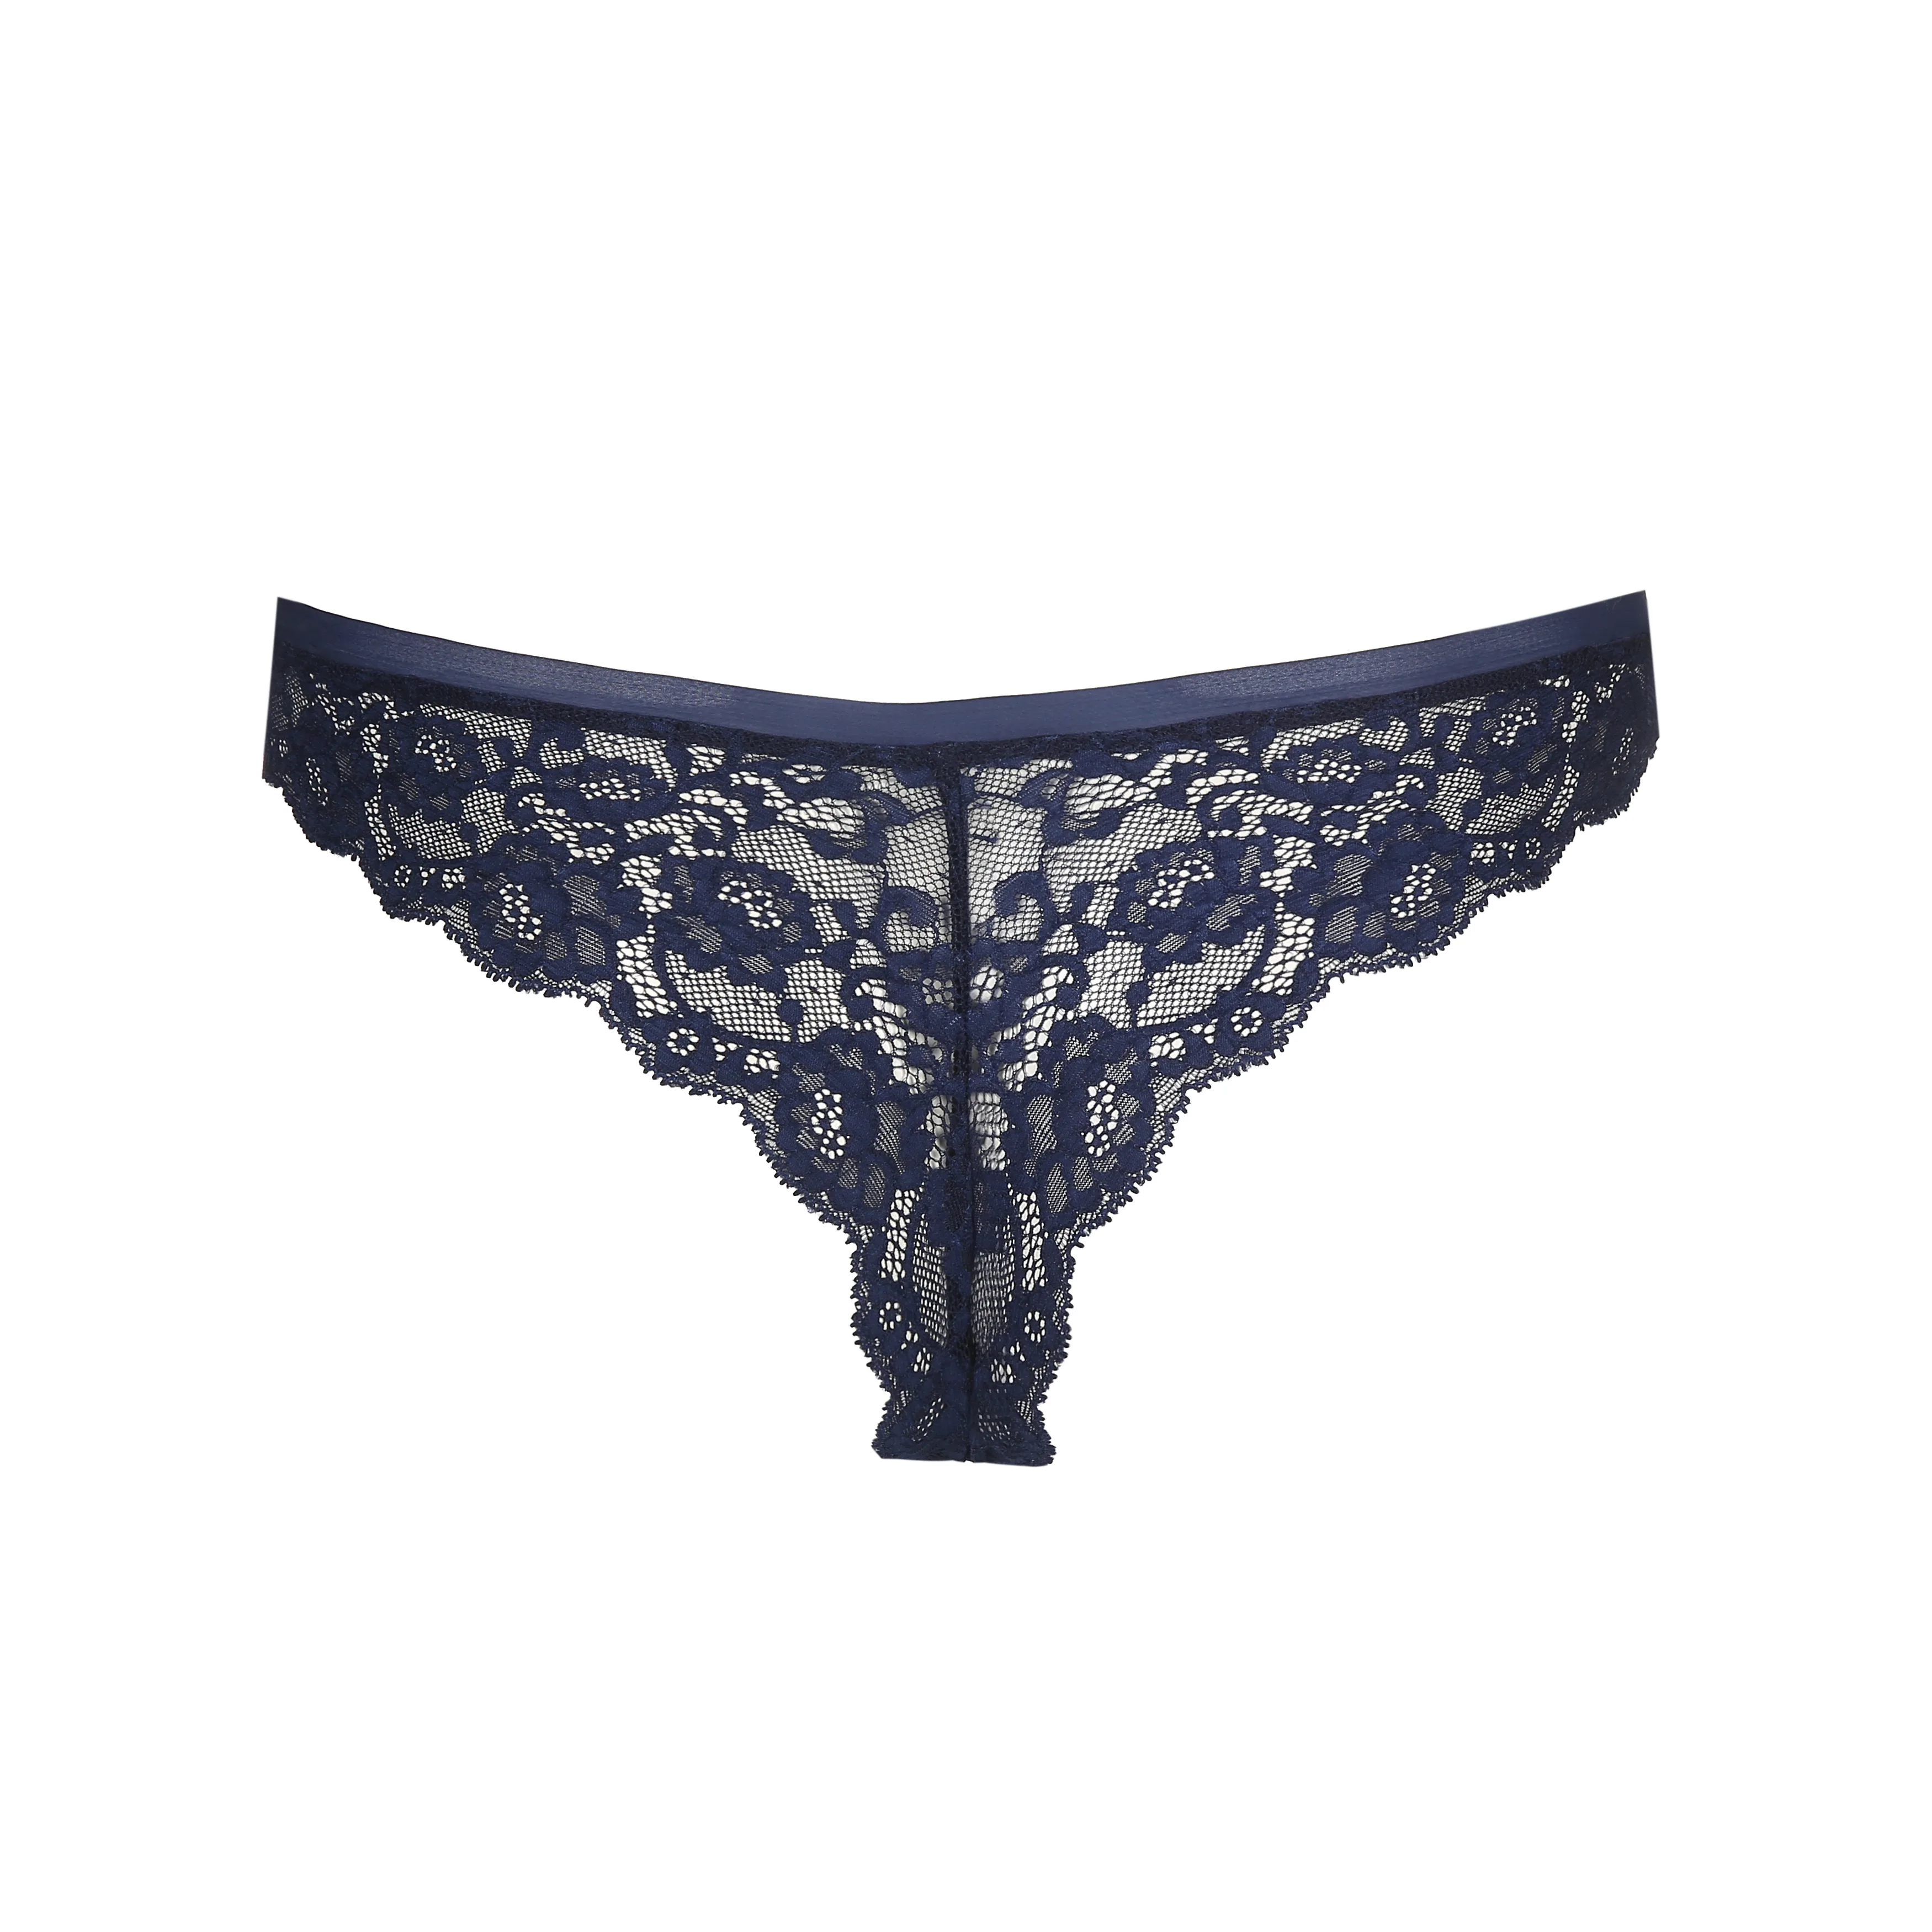 Marie Jo Color Studio Water Blue Thong